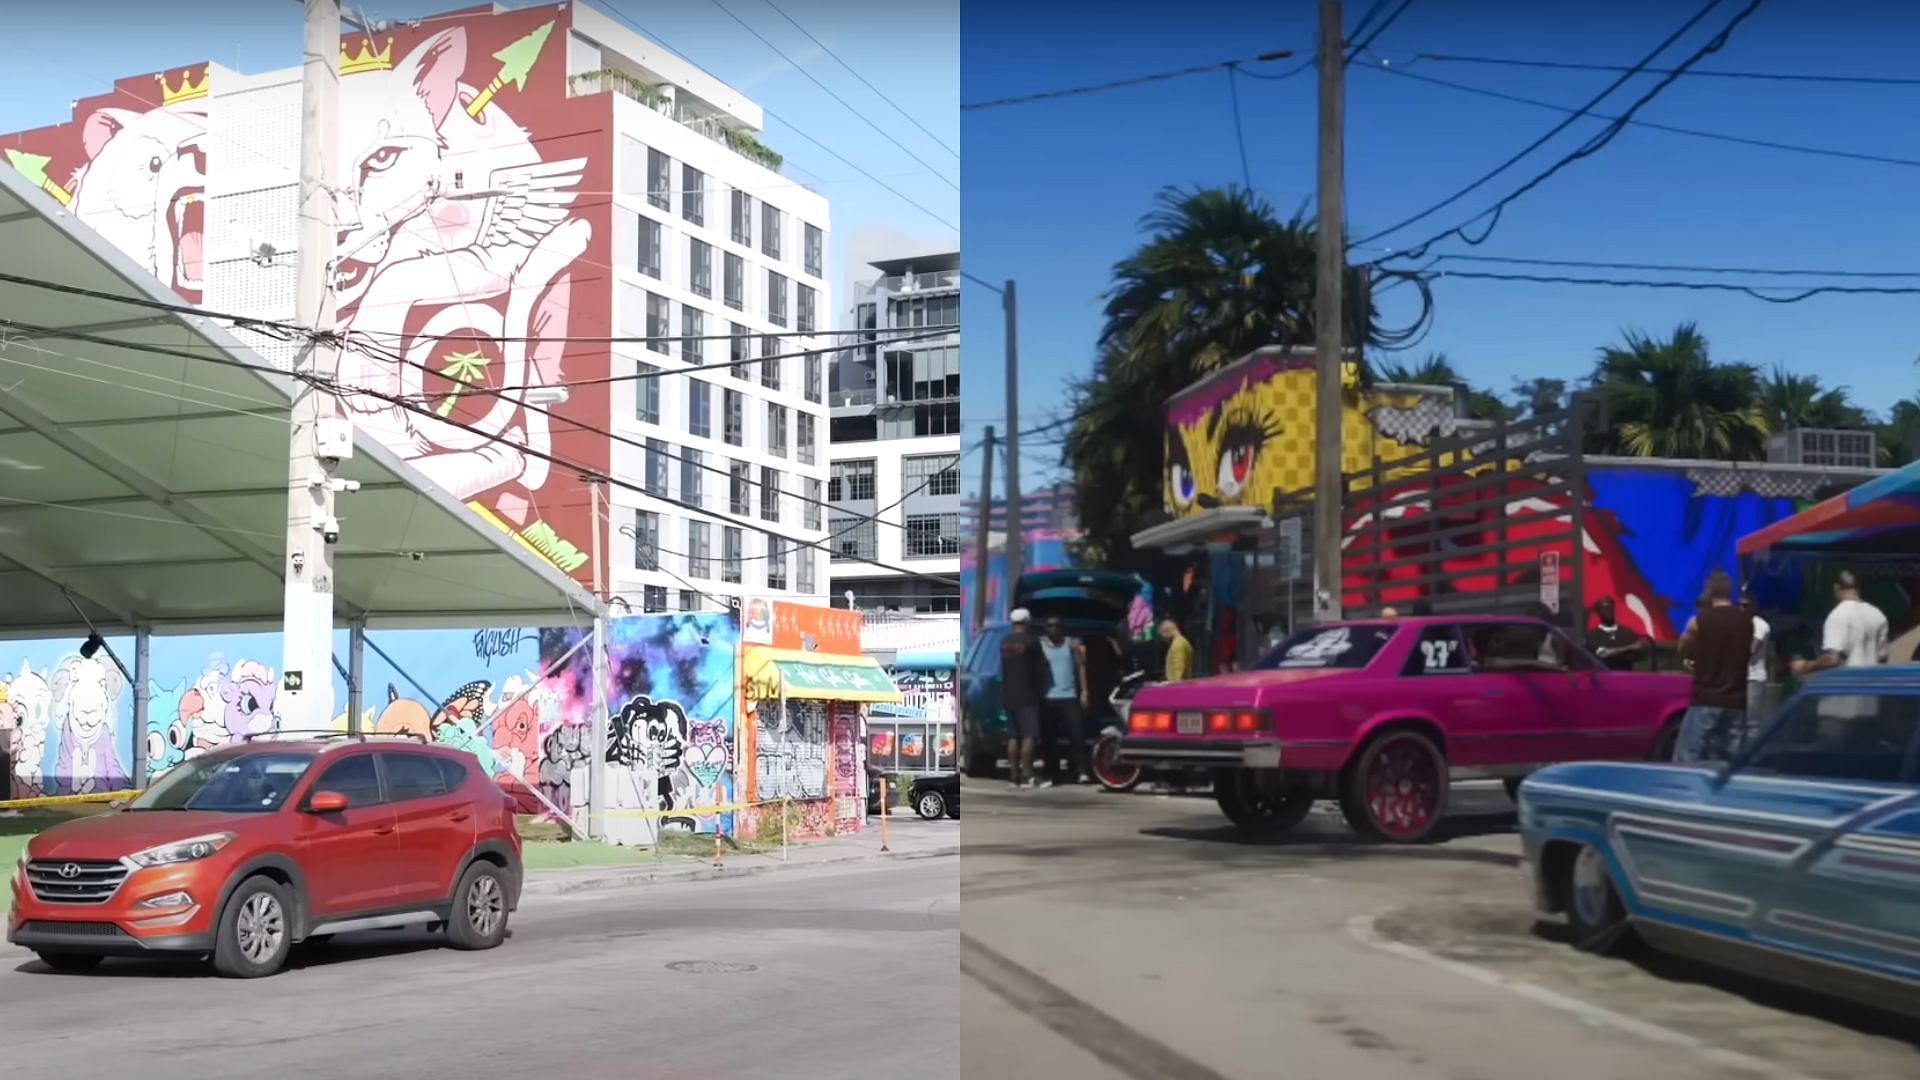 The Wynwood area as seen in the trailer. (Images via YouTube/@JoelFrancoVlogs, Rockstar Games)